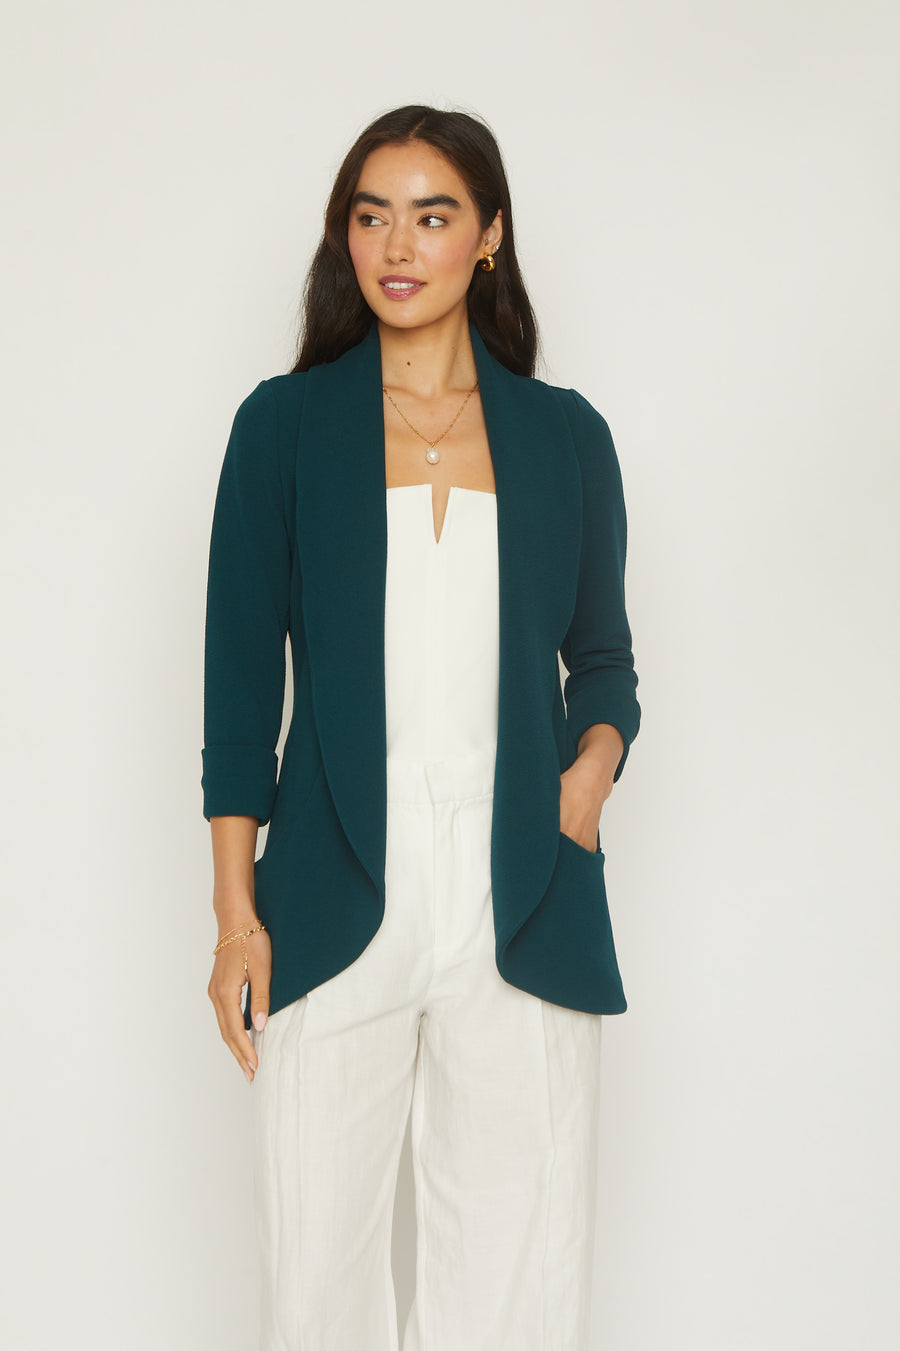 No Srcipt image - Images of 5 of 11 Melanie knit jacket, knit crepe fabric, 3/4 sleeve length, open front , shawl collar, front pocket, soft and stretch, teal color